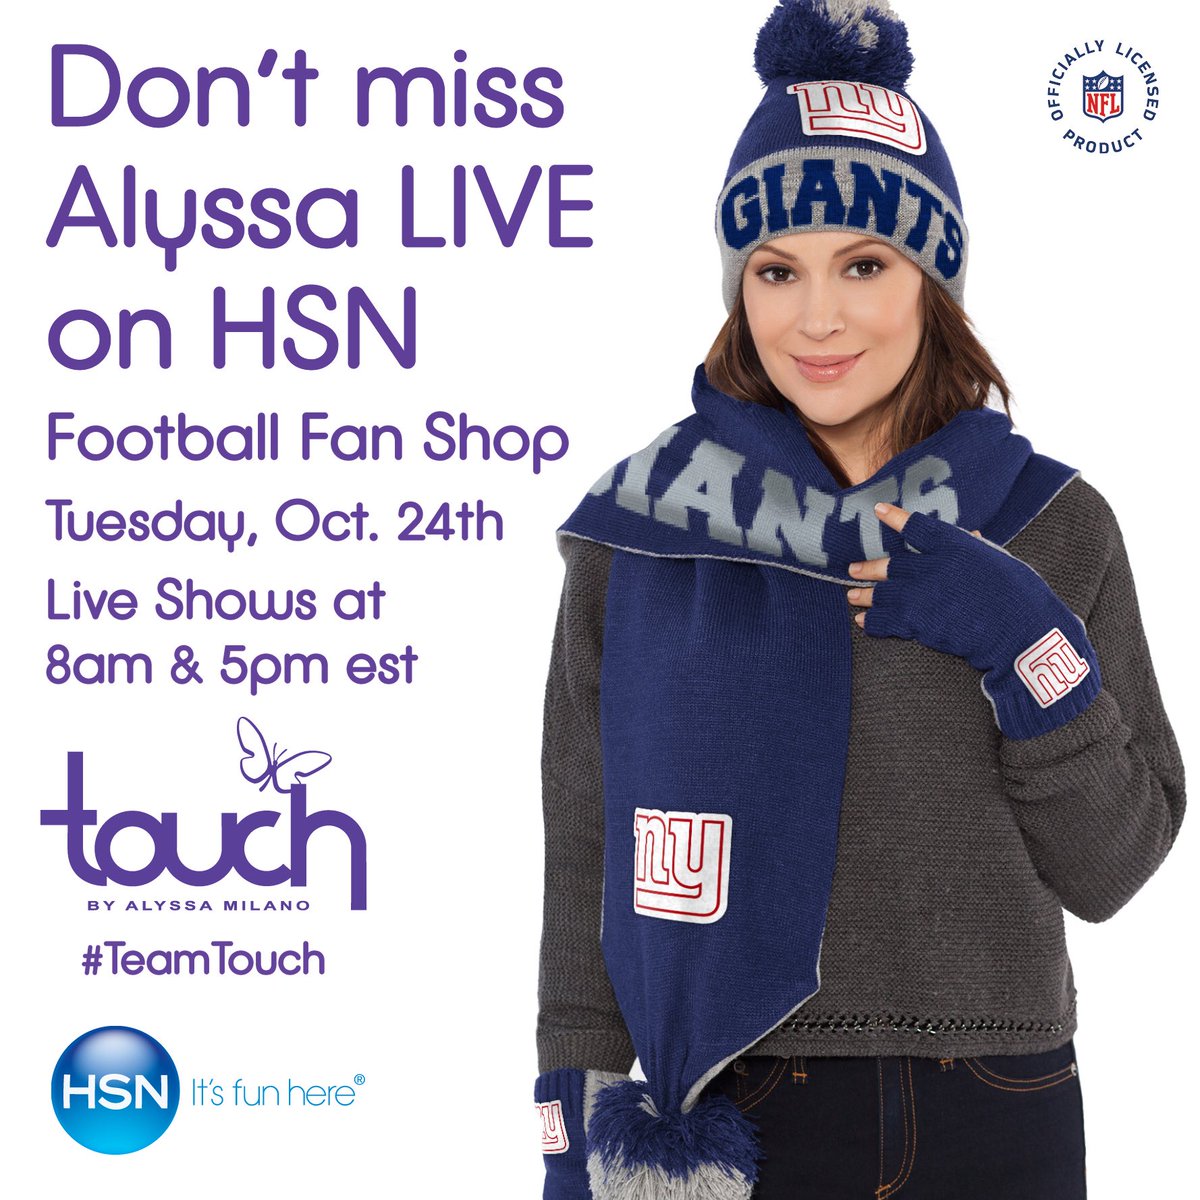 Getting ready to go live on @HSN! 8am hour! Come have your coffee with me and see cute NFL fashion. ❤️ #teamtouch https://t.co/vZ7rYWI7Gt